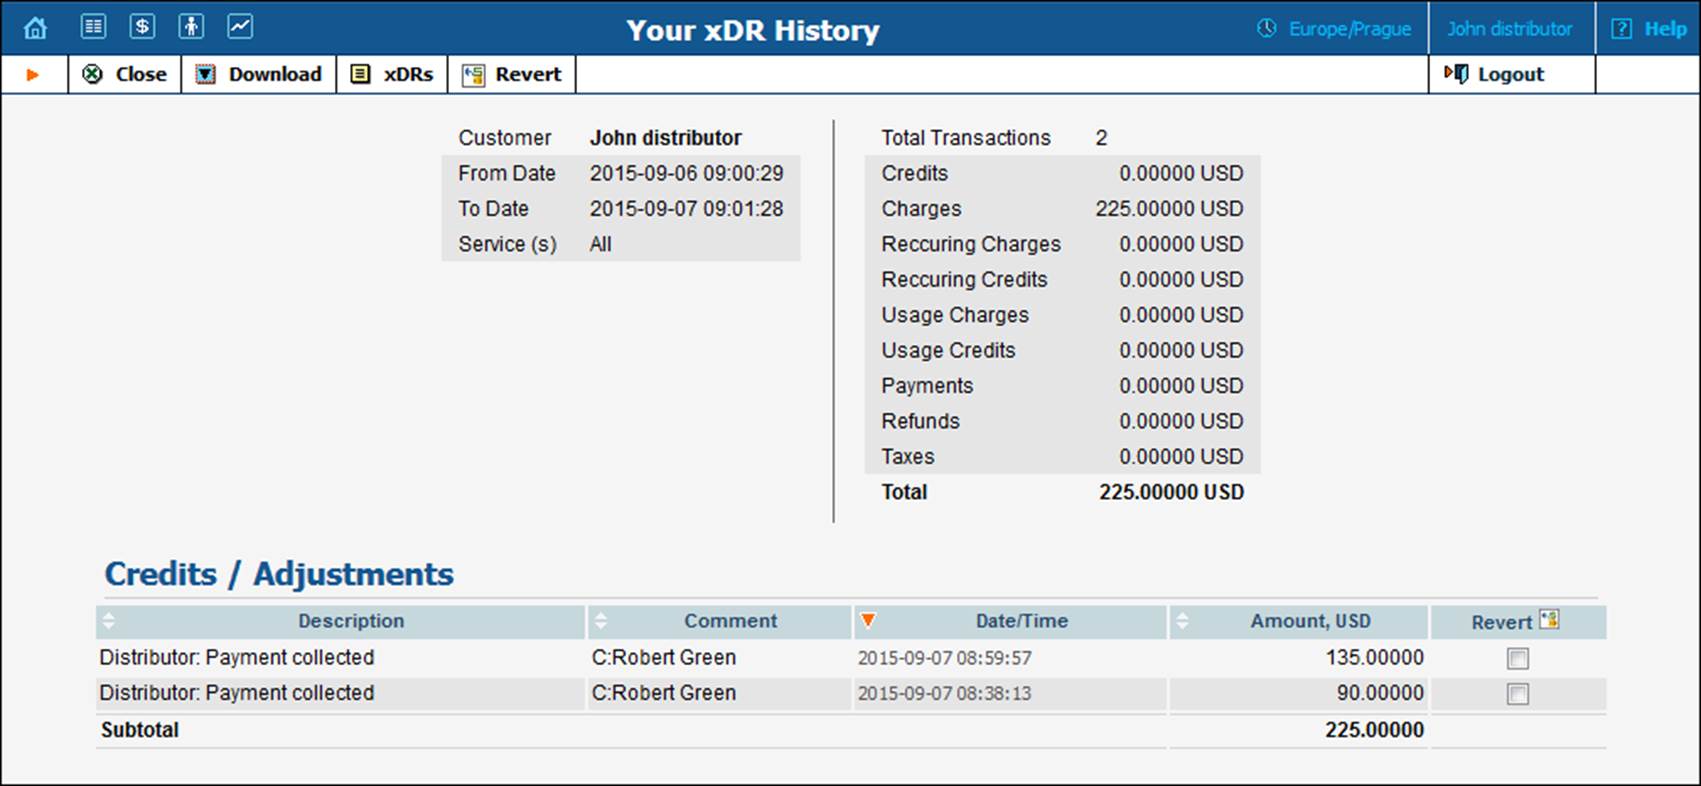 Browse the xDR history 